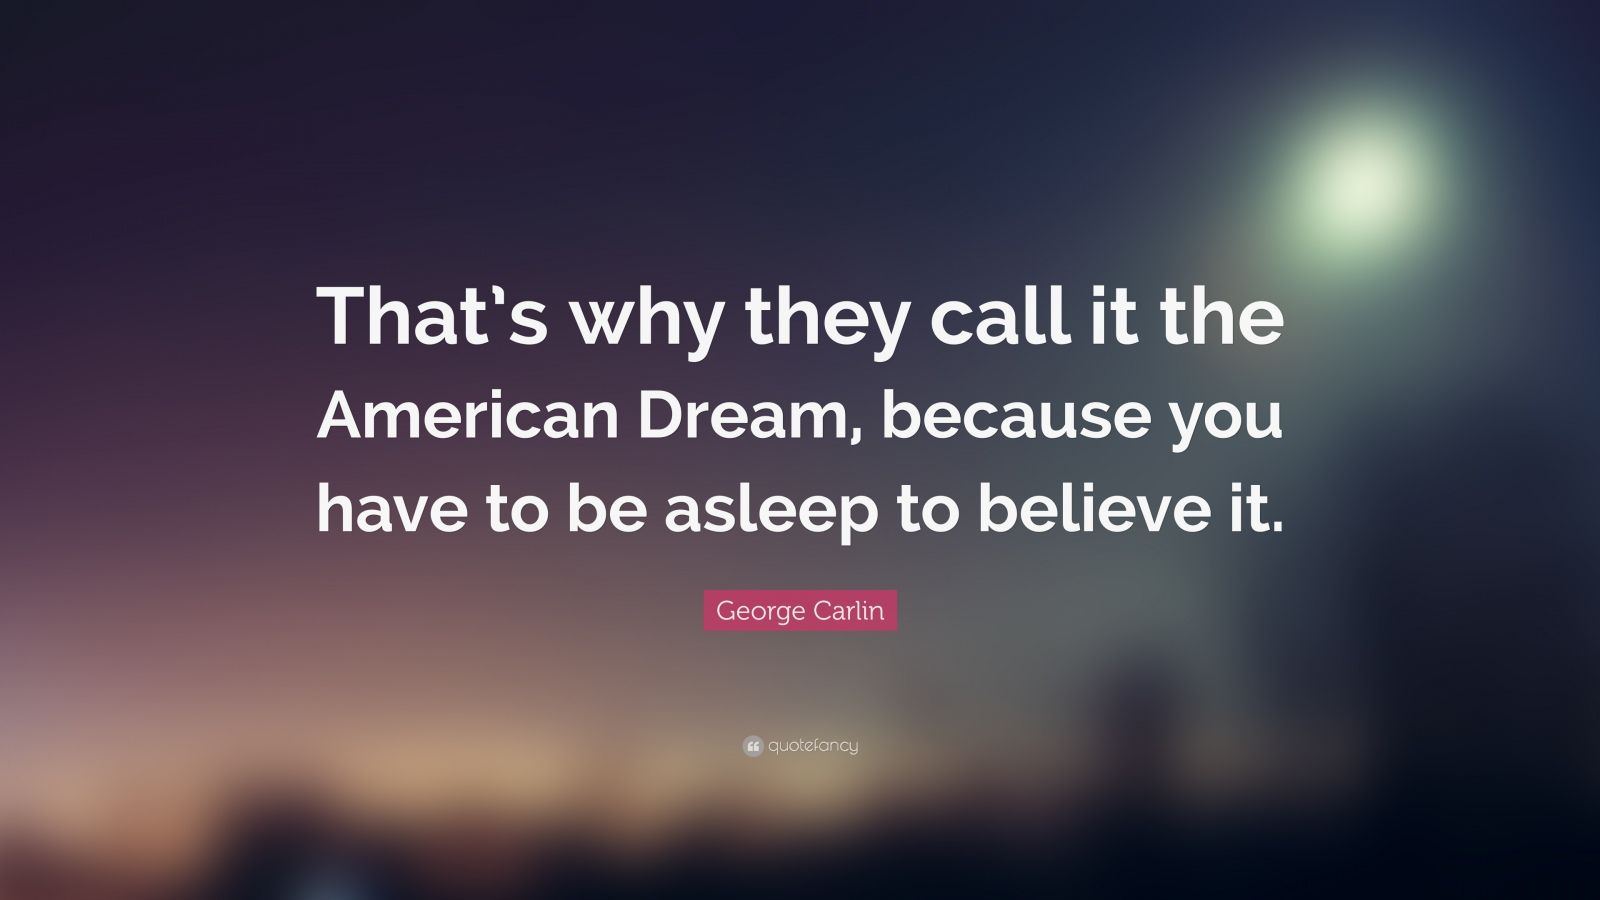 George Carlin Quote: “That’s why they call it the American Dream